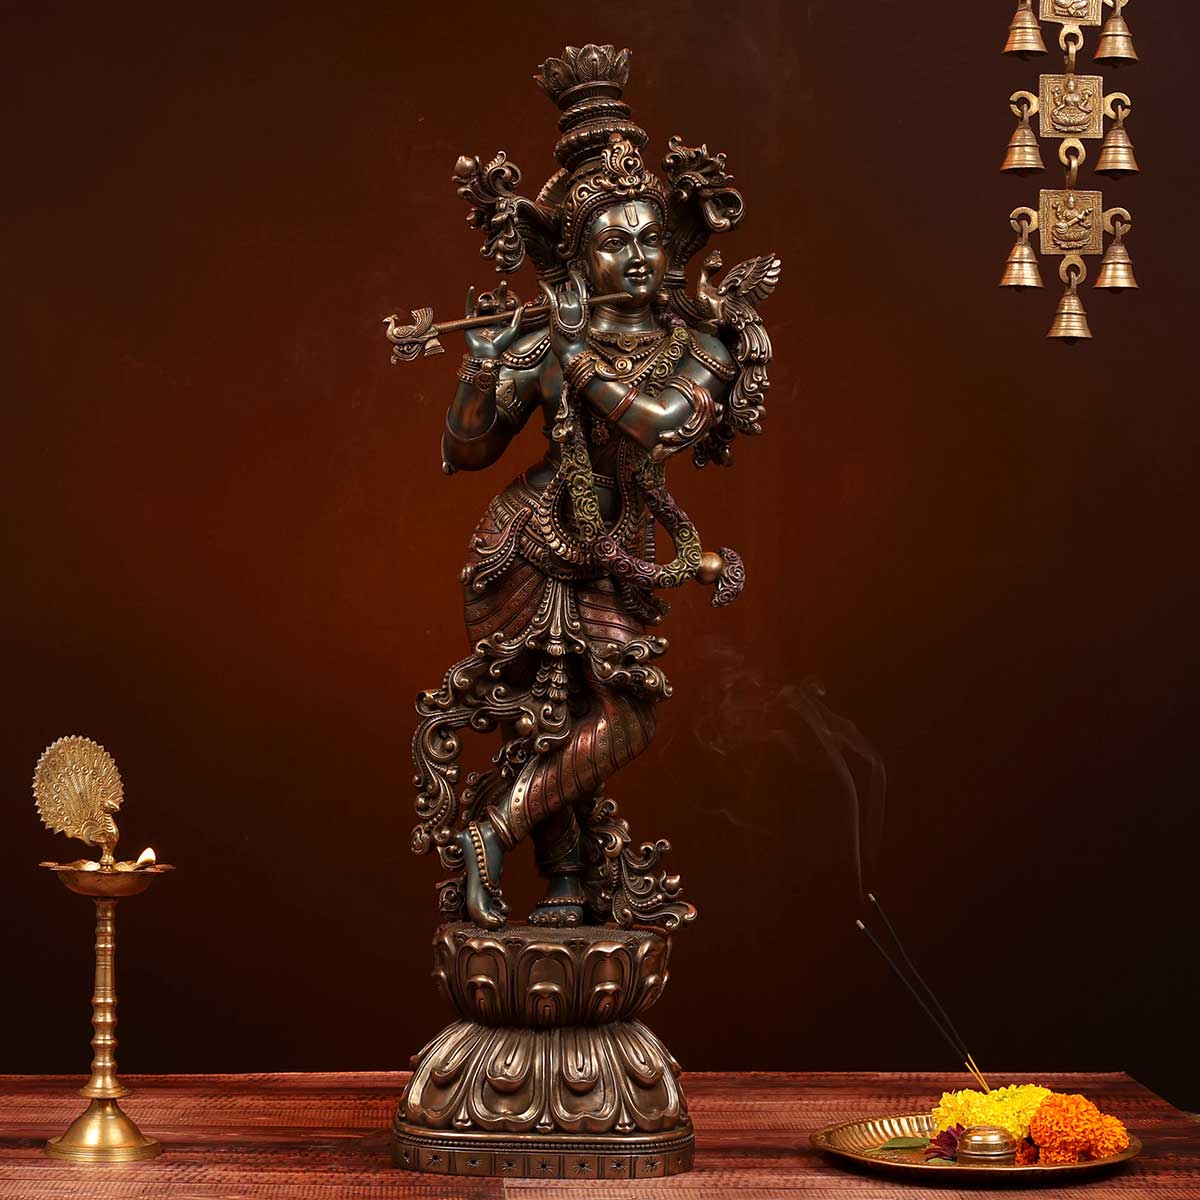 Black and gold Krishna brass statue - Buy exclusive brass statues